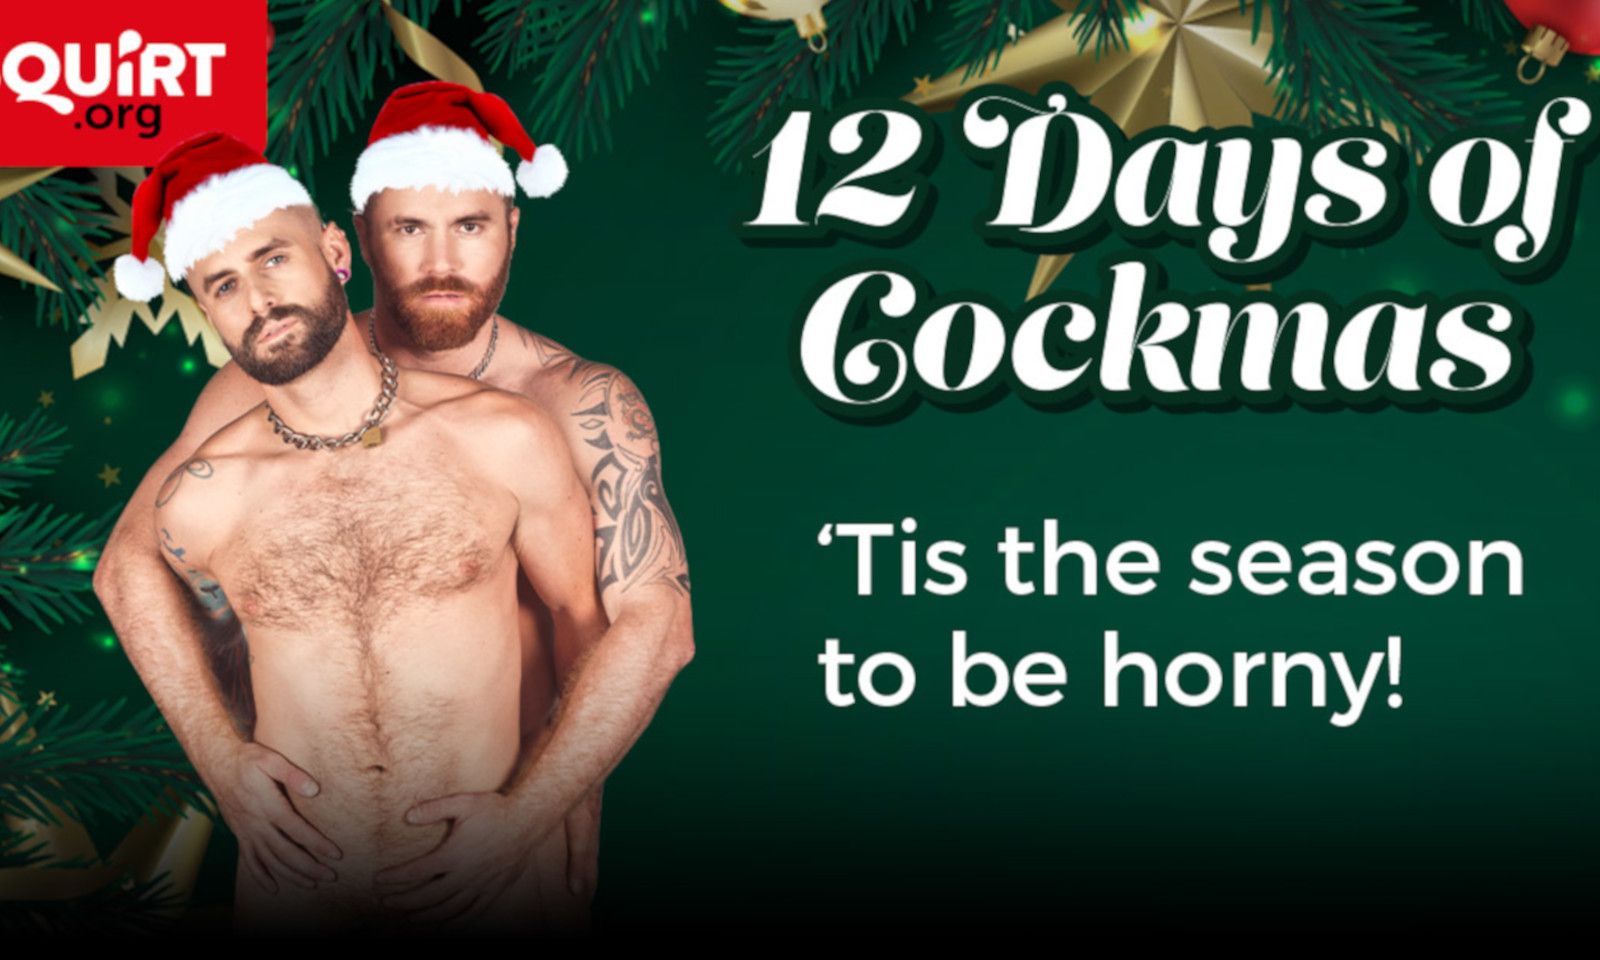 Squirt.org Launches 'The 12 Days of Cockmas' Promotion